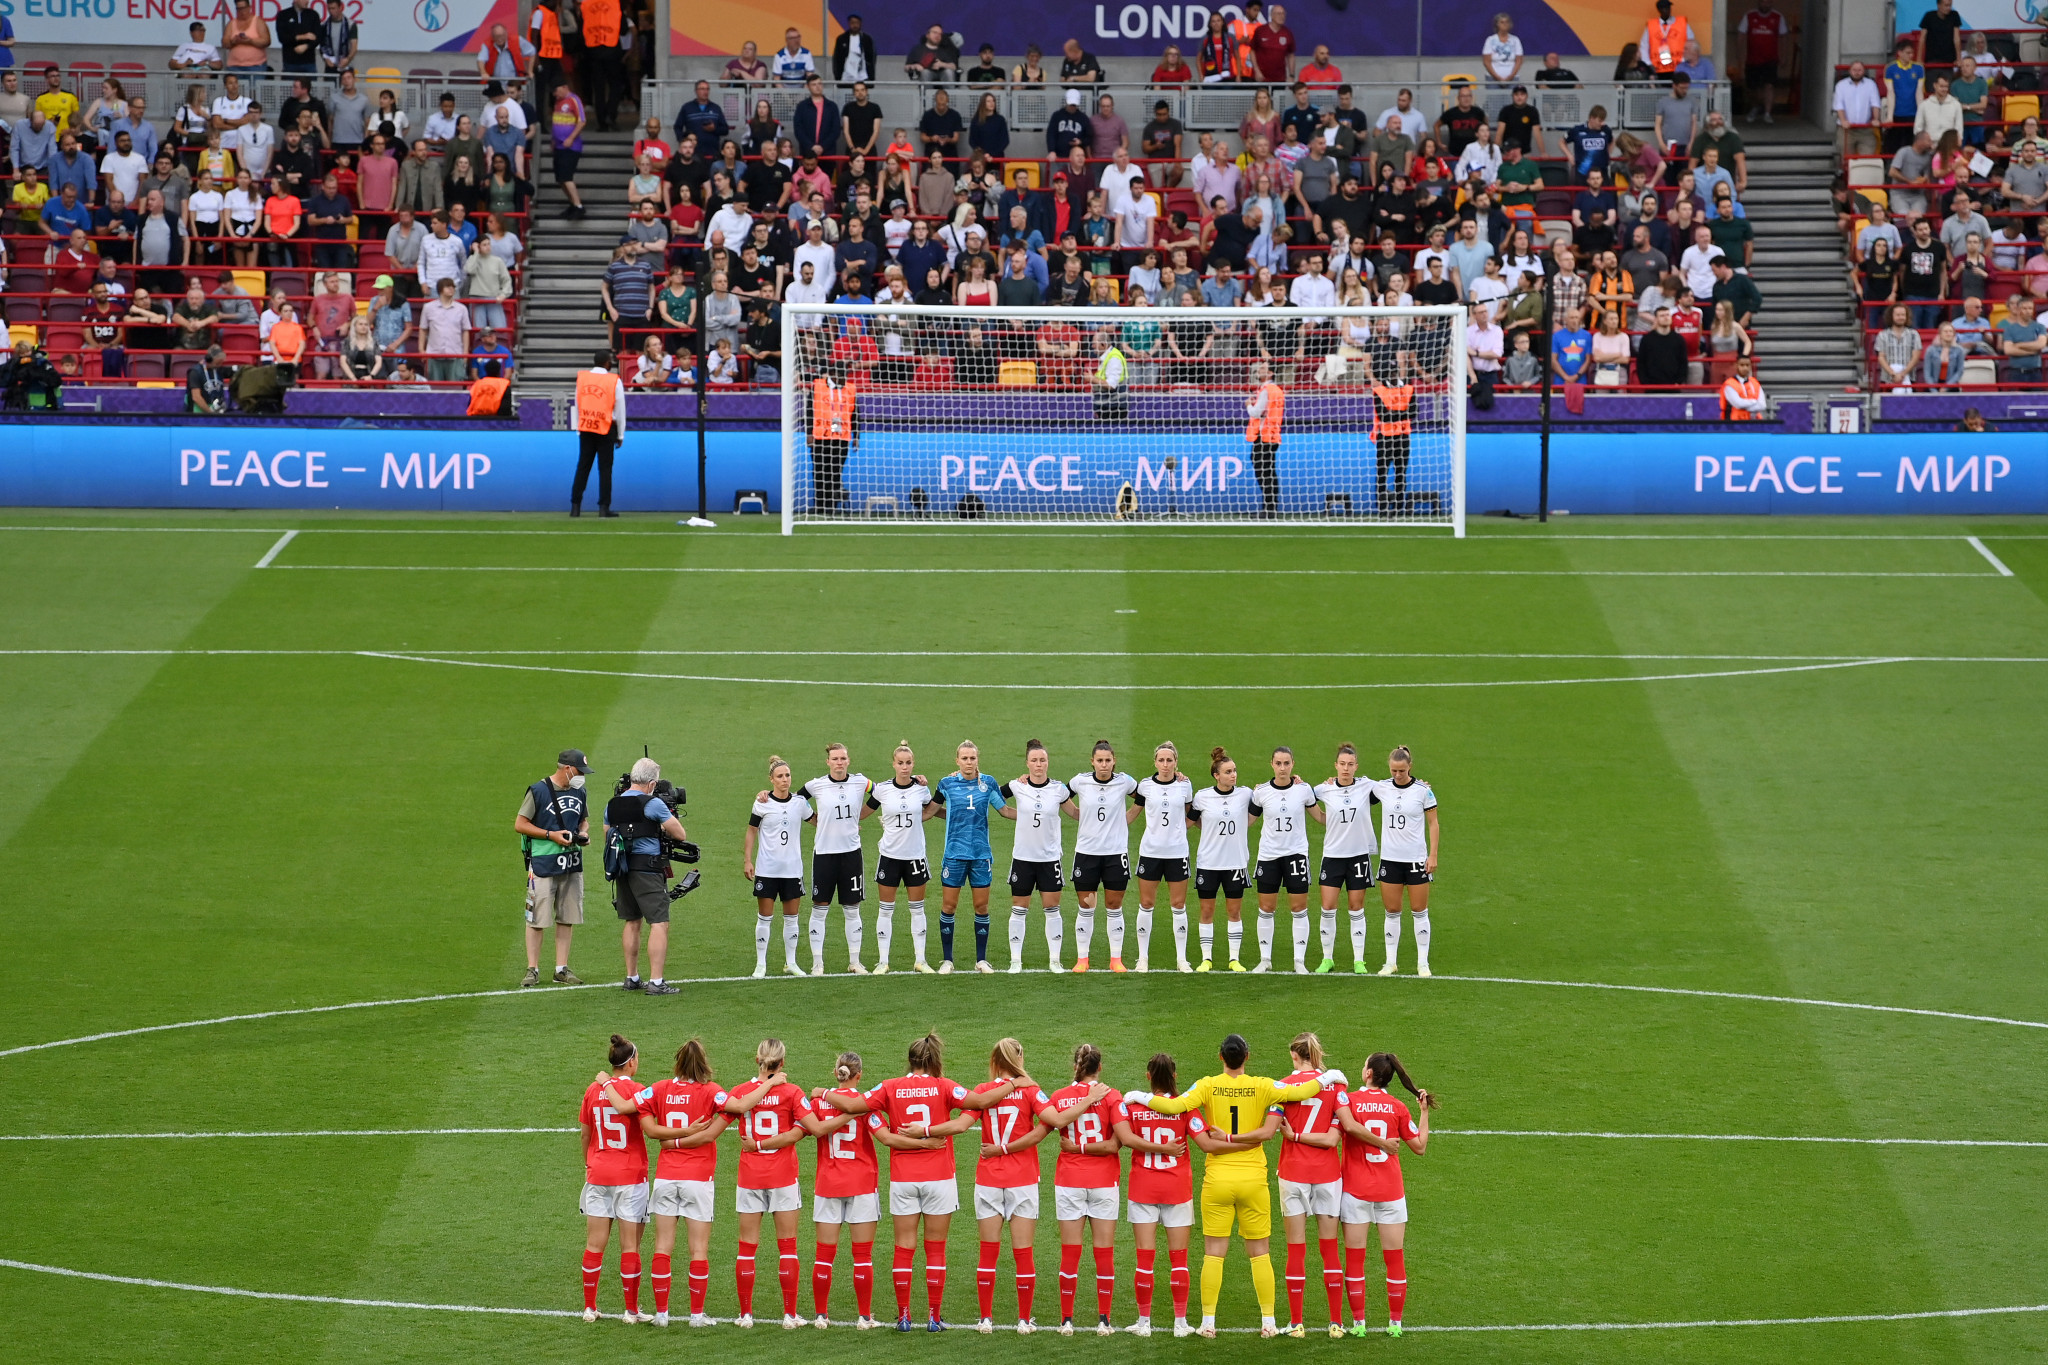 A moment's silence was held for Uwe Seeler before last night's UEFA Euro 2022 match between Germany and Austria in London ©Getty Images